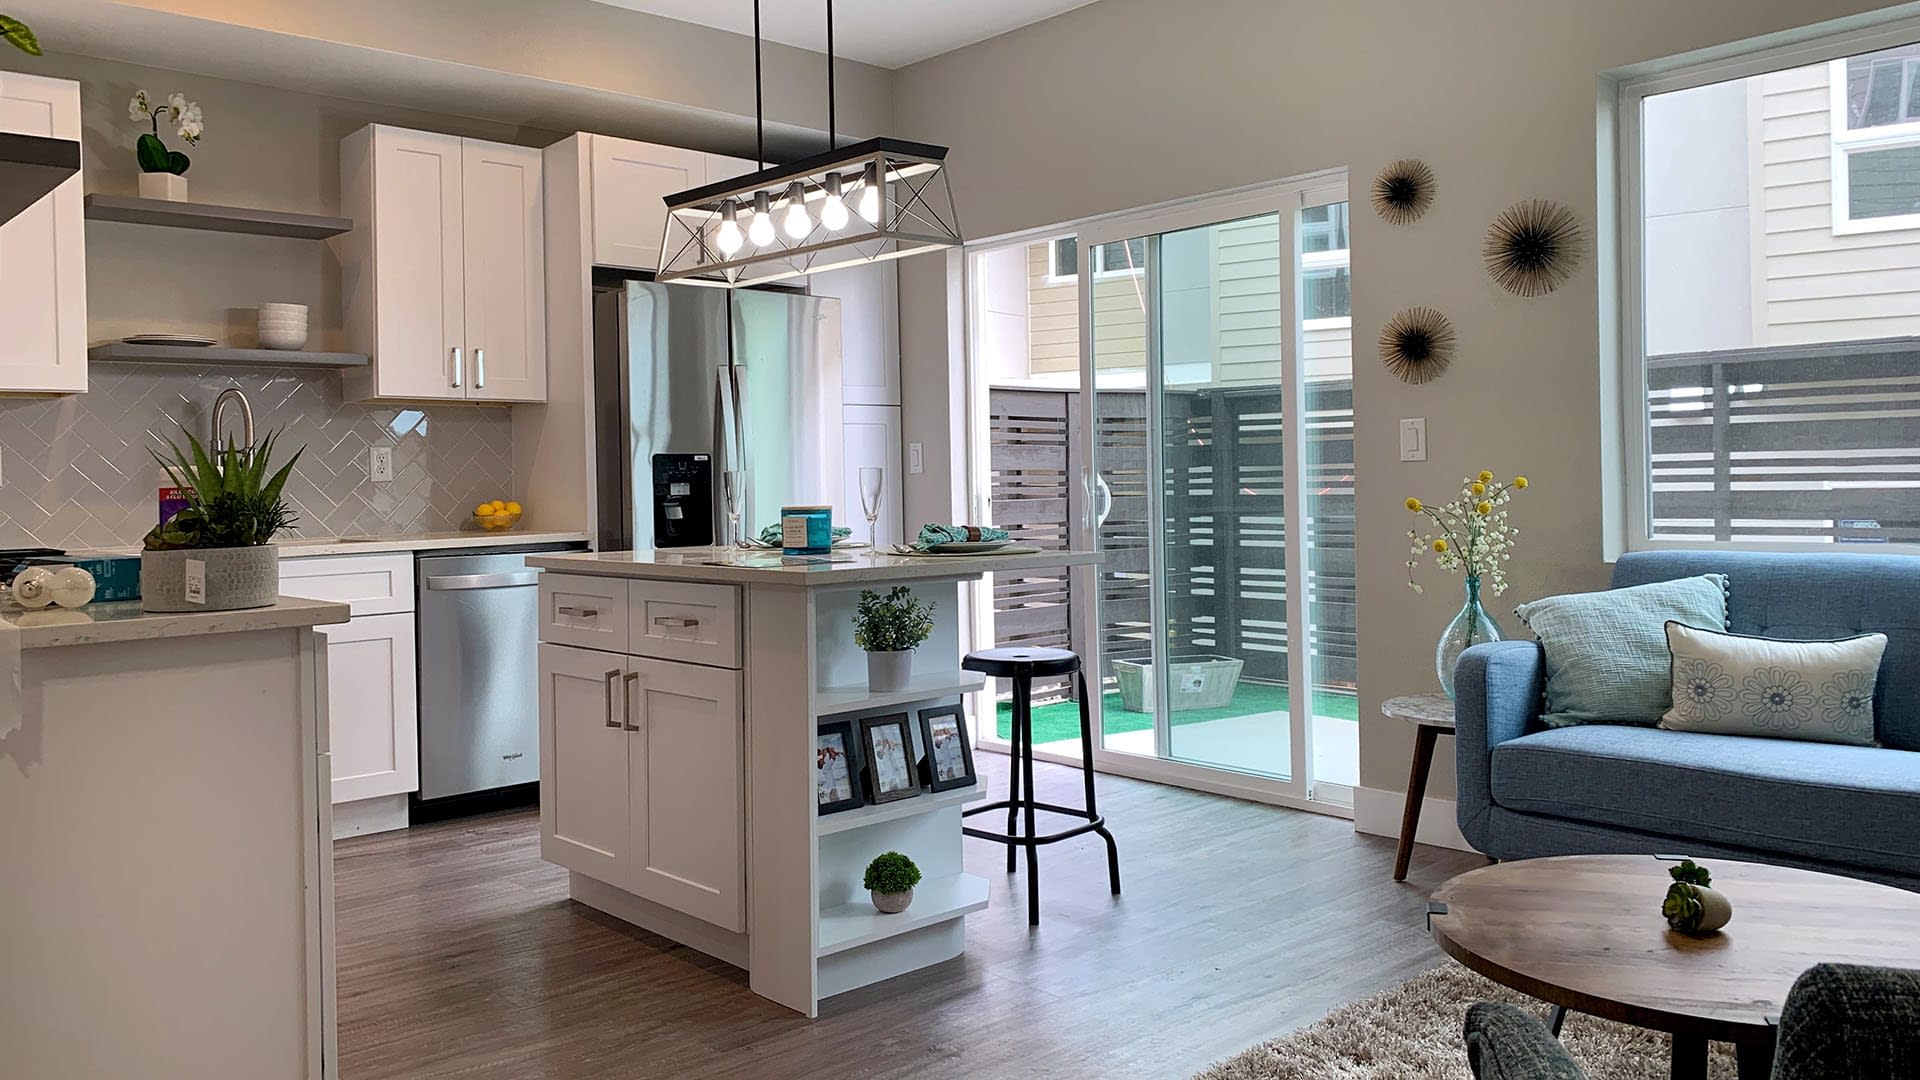 Kitchen/Living Room residential townhouse multi-family Real estate Projects - Weins Development Group - Award-winning real estate developers in Denver, Colorado. Top #1 of Builders producing high-quality townhomes, condos, apartments, retail, & office projects